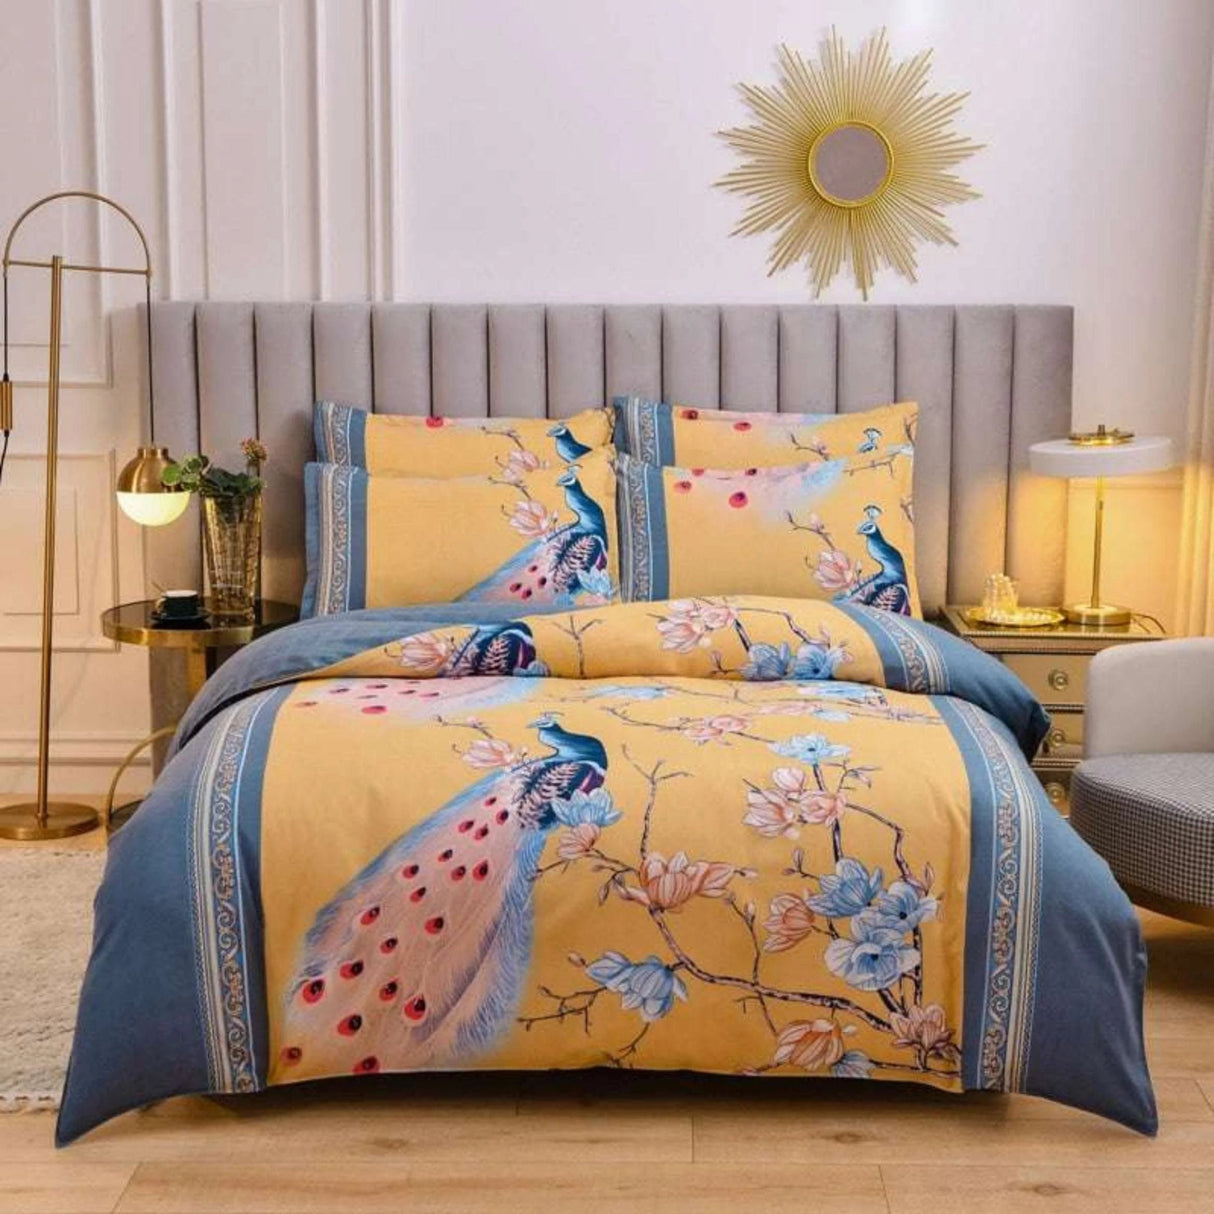 4pc Bedding Set - Healthy and Vibrant Bedroom - Julia M LifeStyles